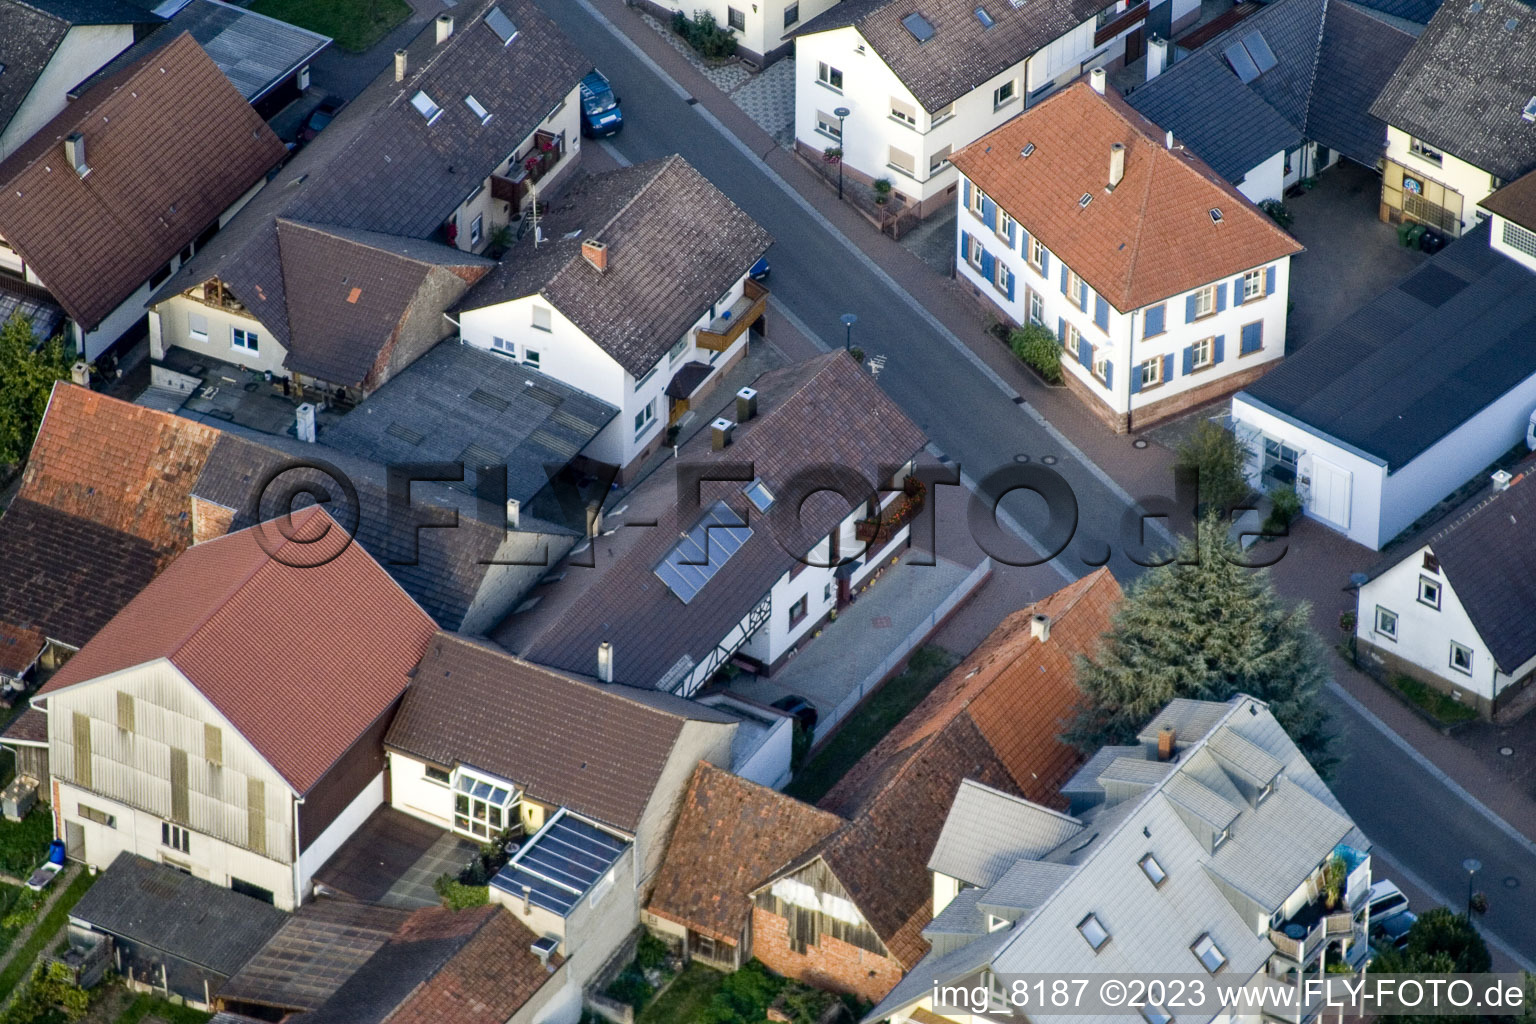 District Urloffen in Appenweier in the state Baden-Wuerttemberg, Germany from the drone perspective